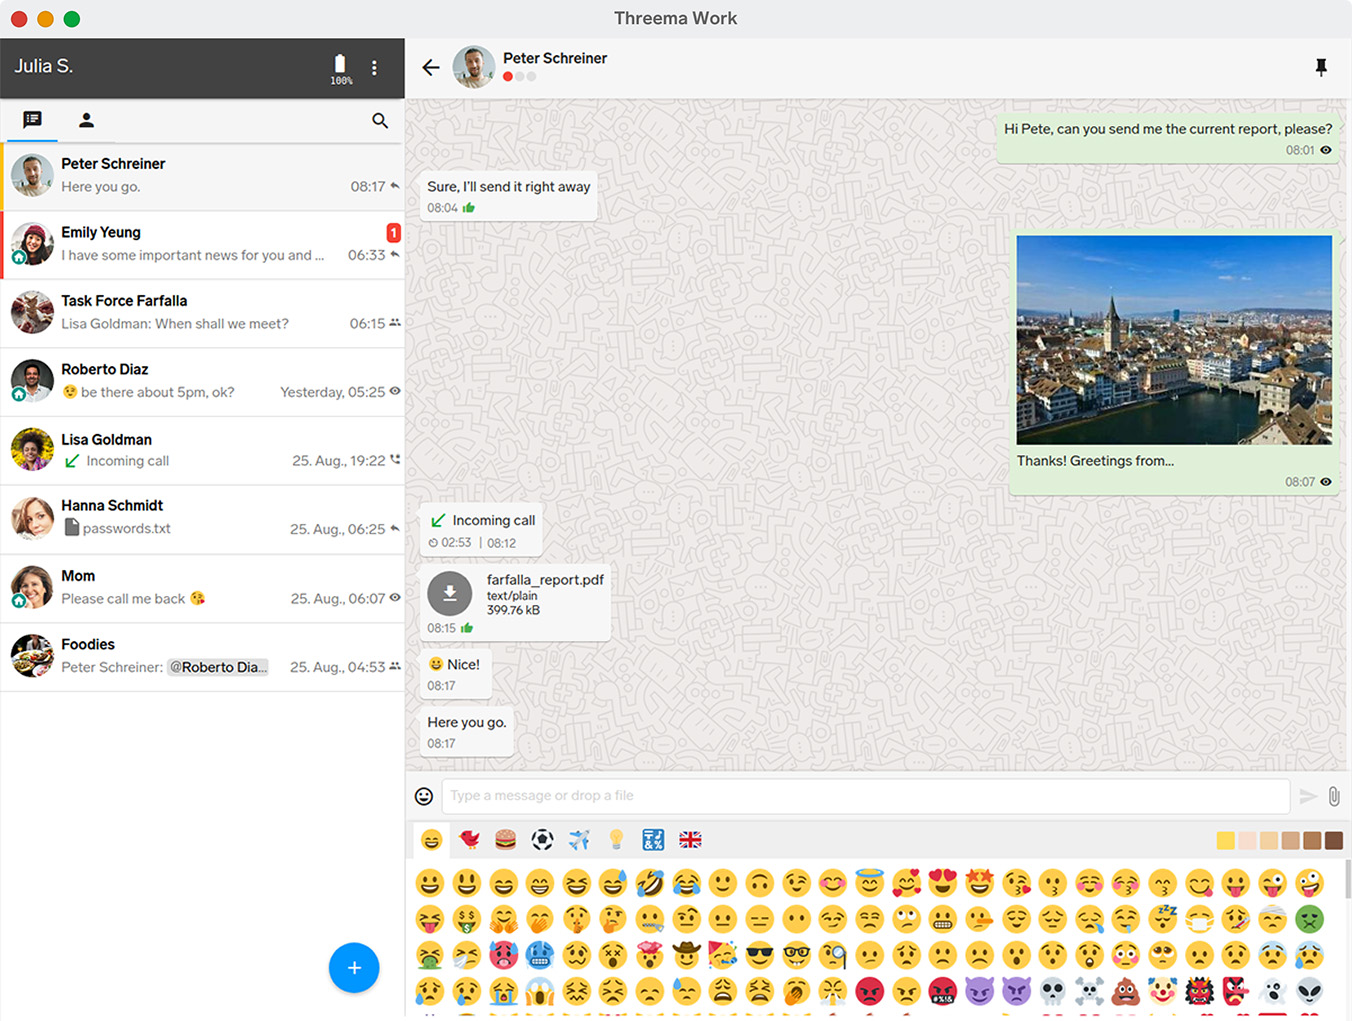 Chat overview in the desktop app of the business messenger Threema Work